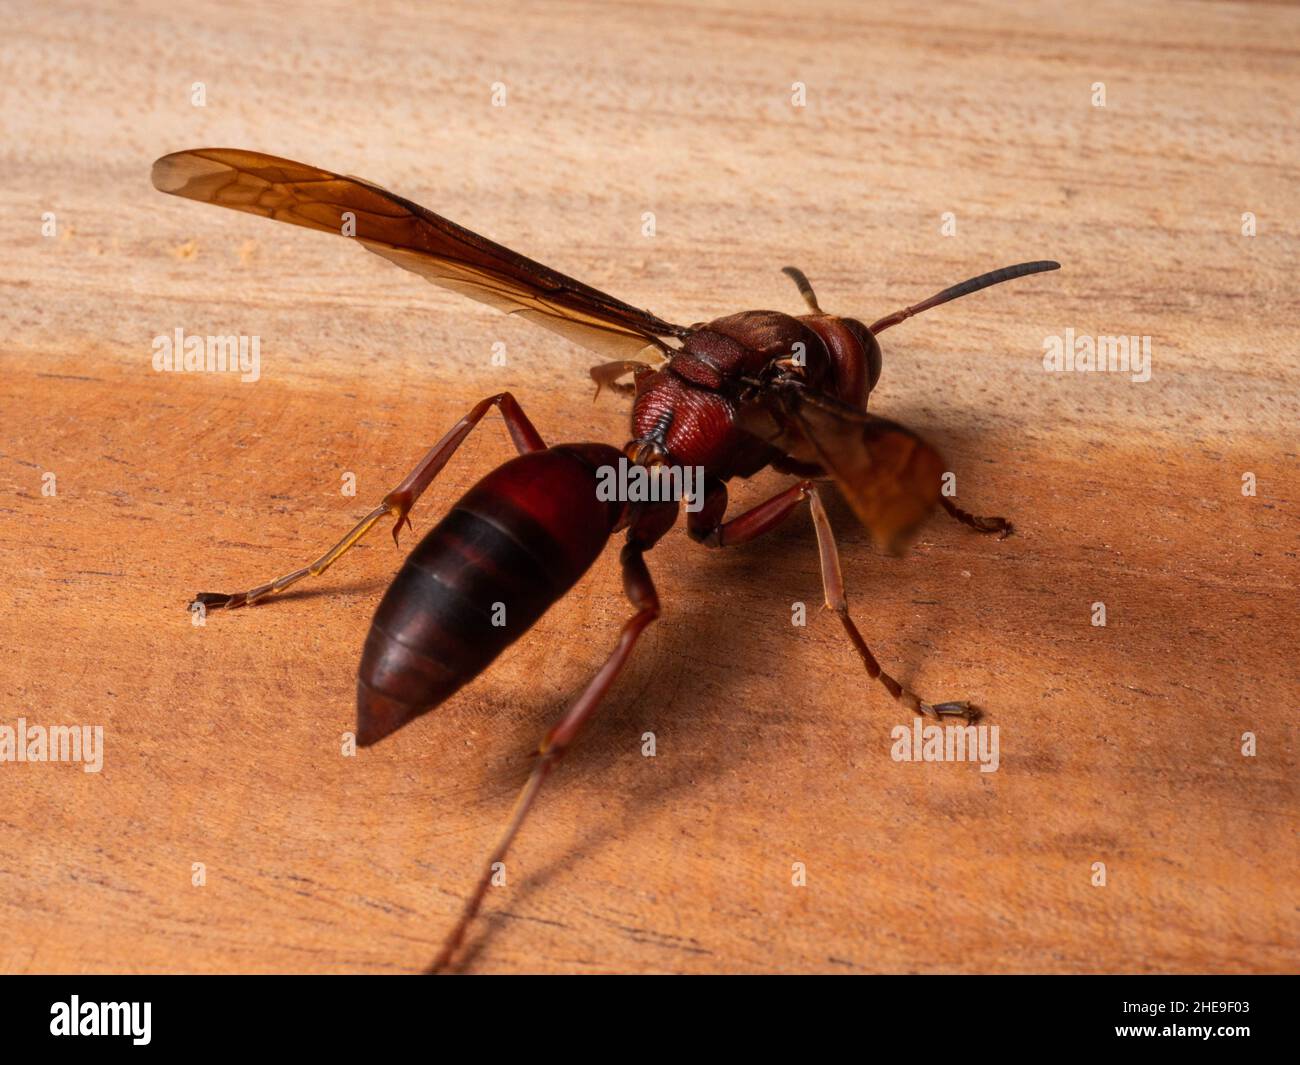 Ropalidia fasciata, a common paper wasp, is a wide-ranging species that is distributed from India to the Lesser Sunda Islands, Palawan, Stock Photo